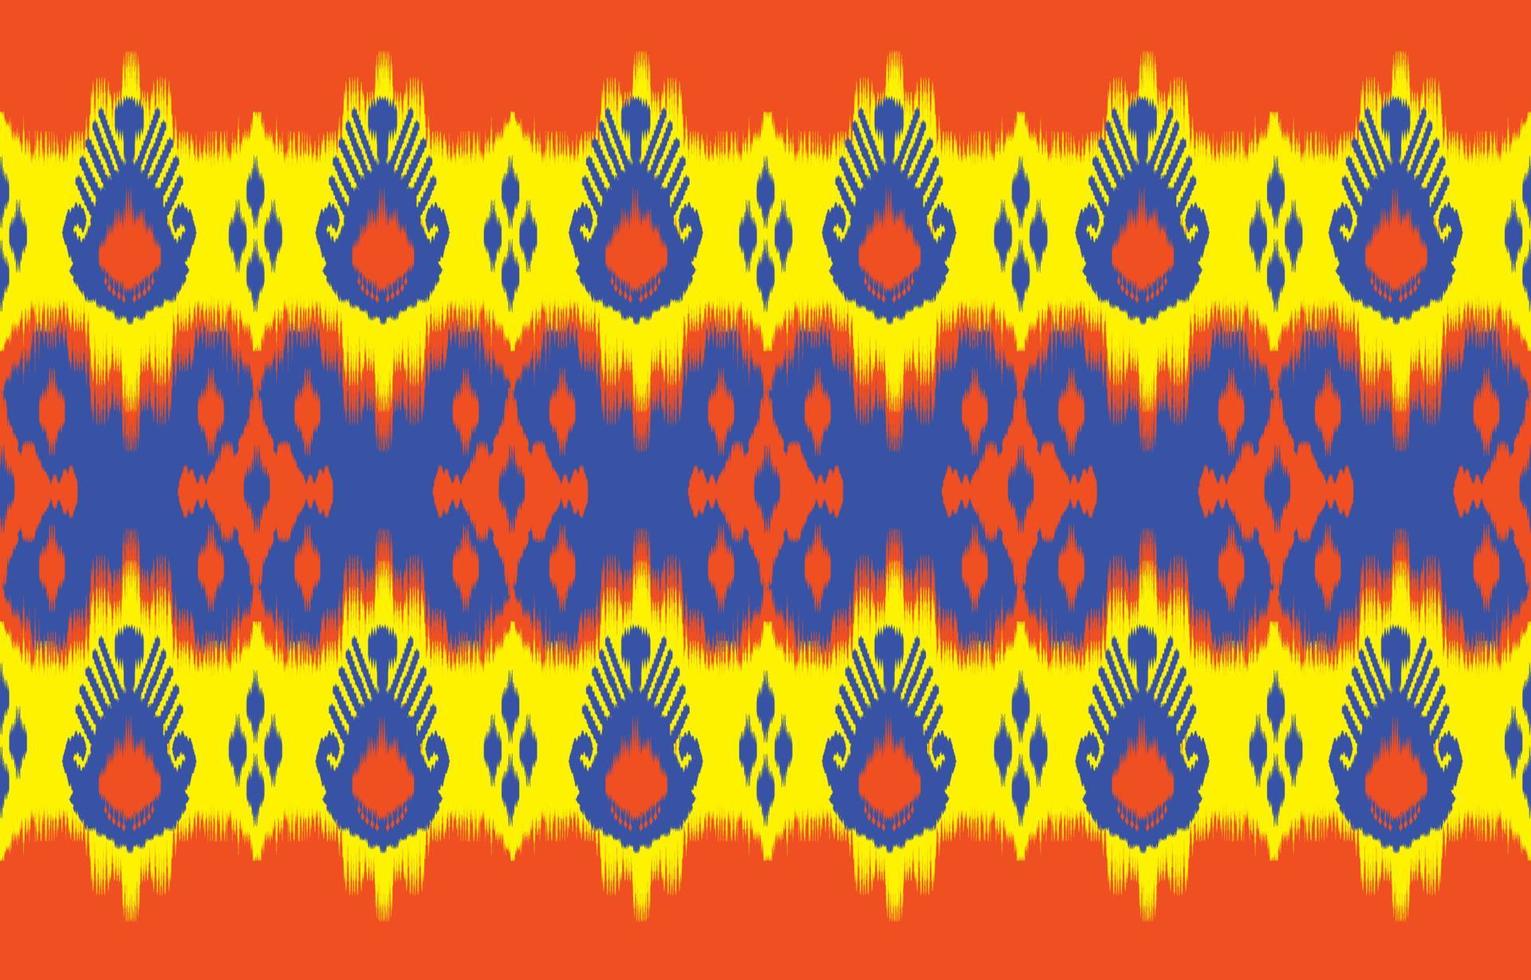 Uzbek ikat pattern, Beautiful ethnic art. Seamless pattern in tribal, folk embroidery in central Asia style. art ornament print. Design for carpet, wallpaper, clothing, wrapping, fabric, cover. vector